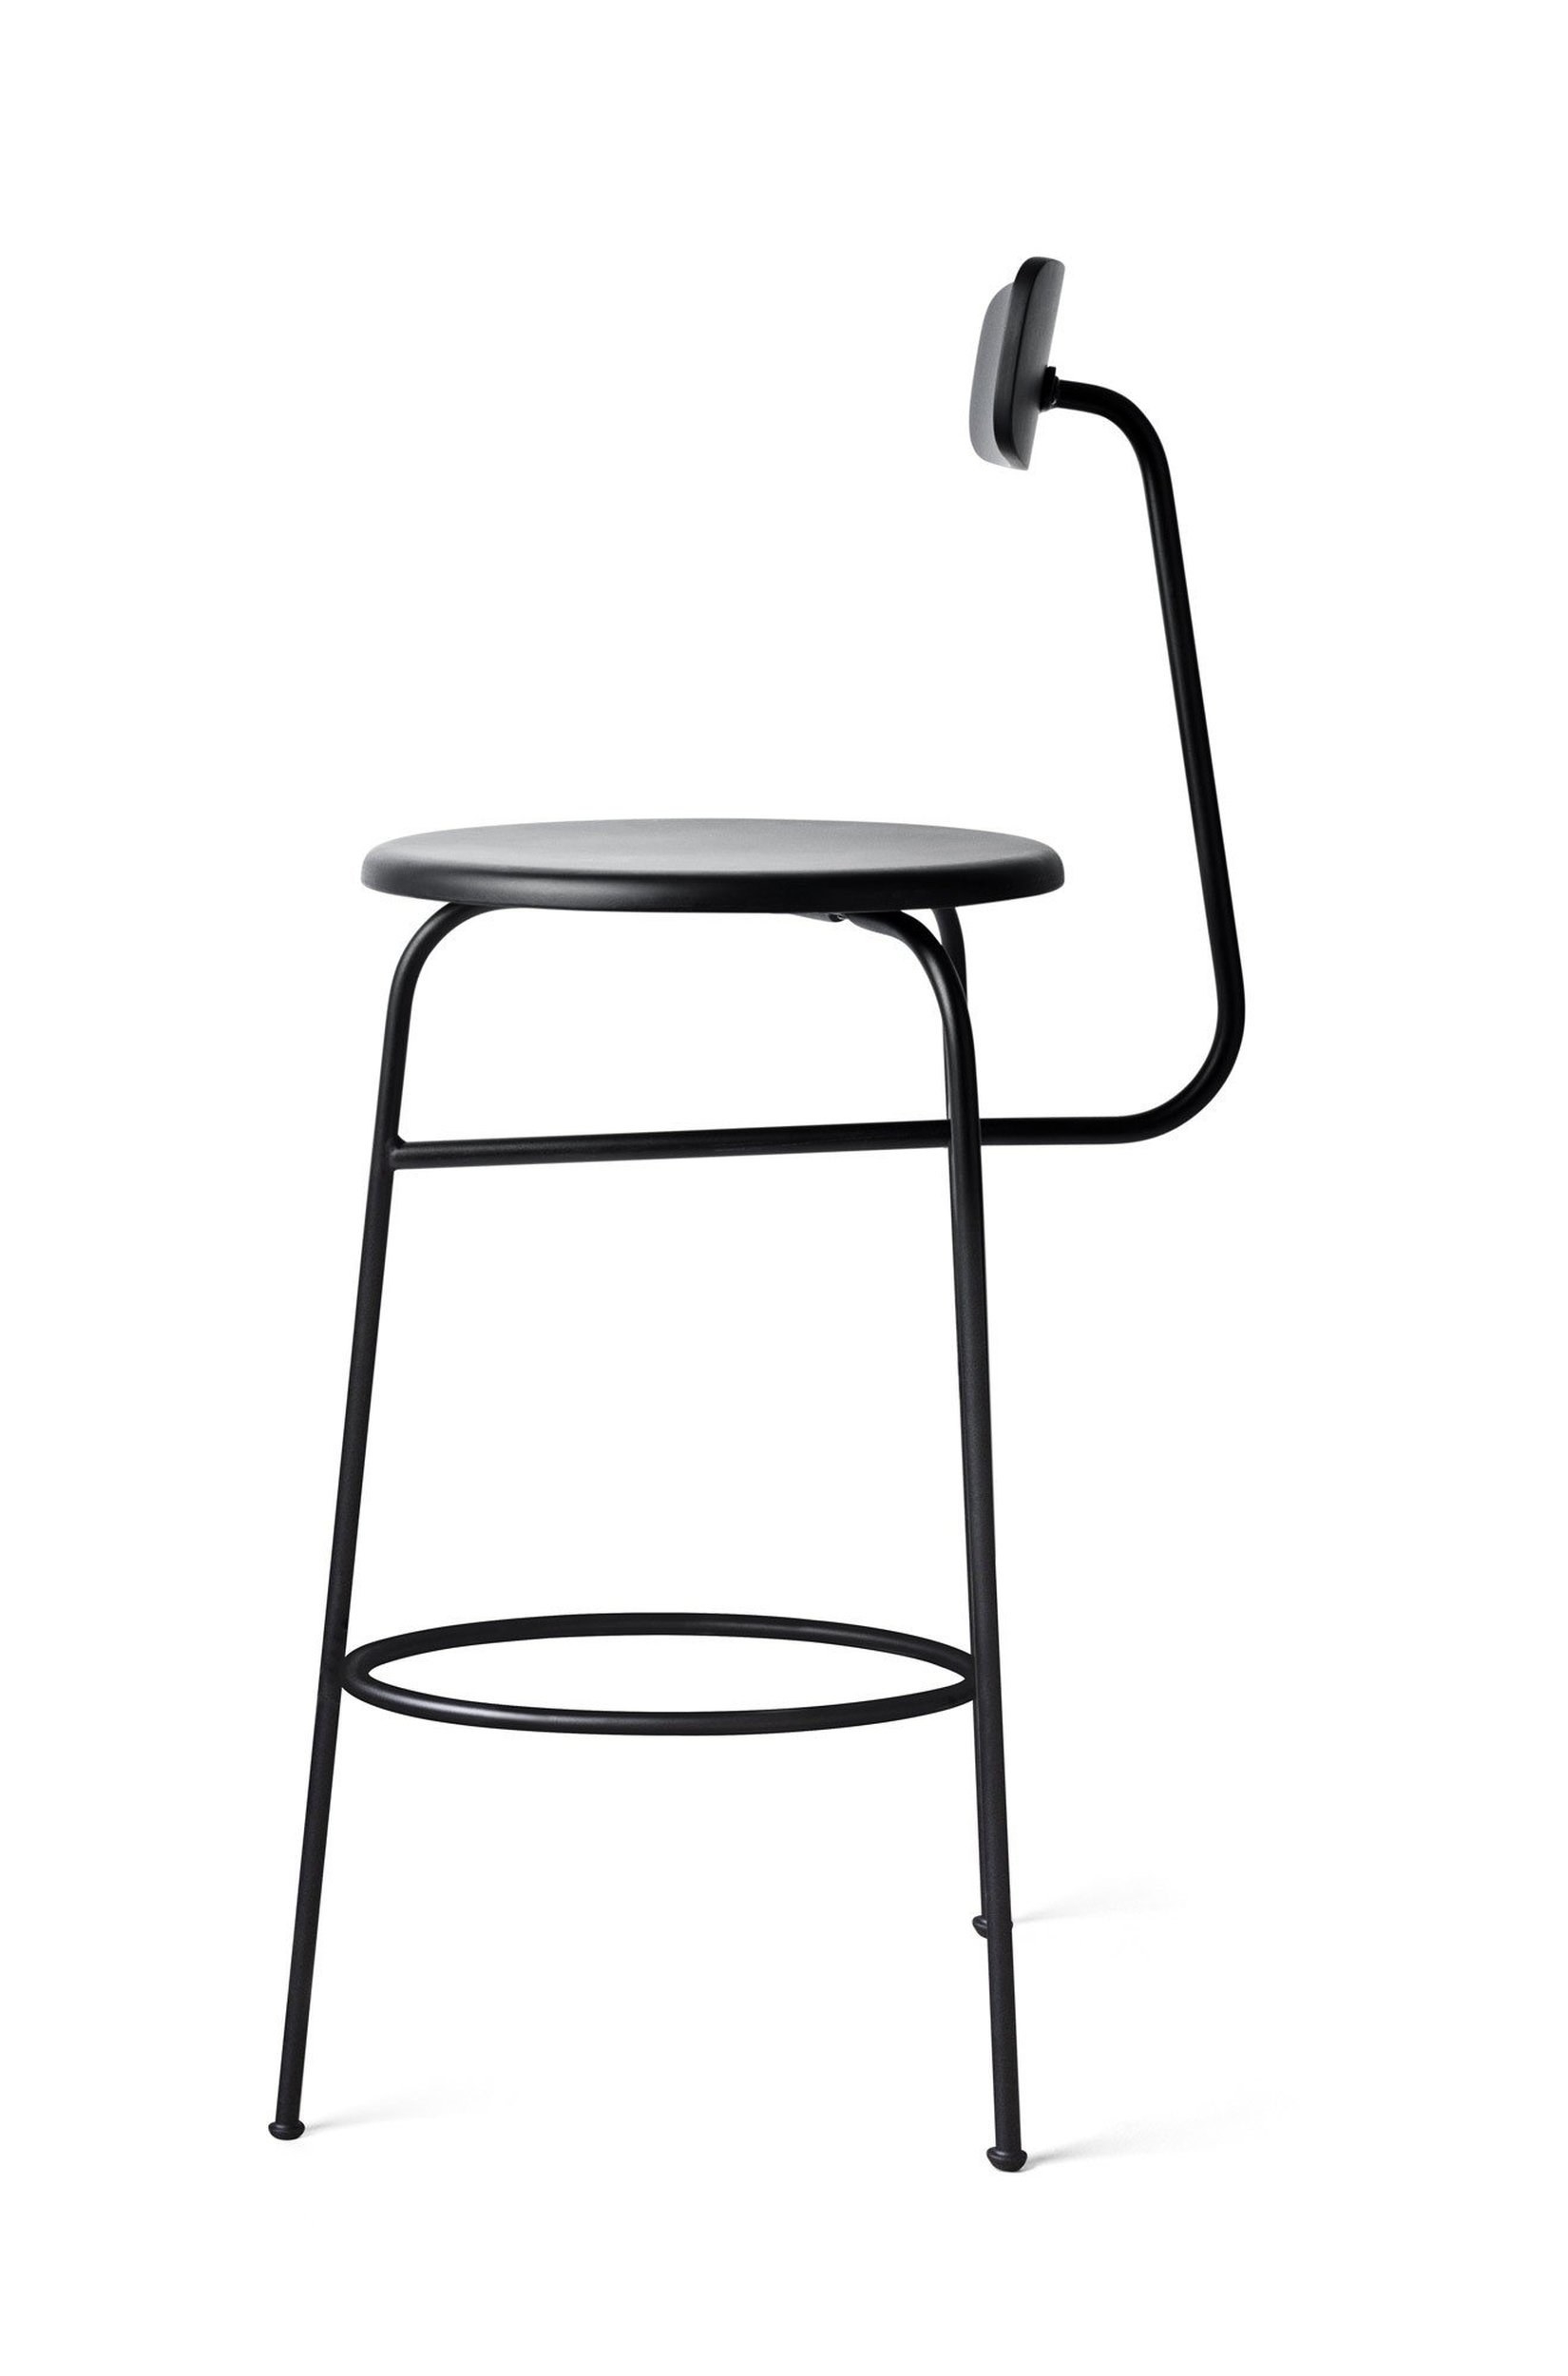 We are proud to introduce the first menu bar stool